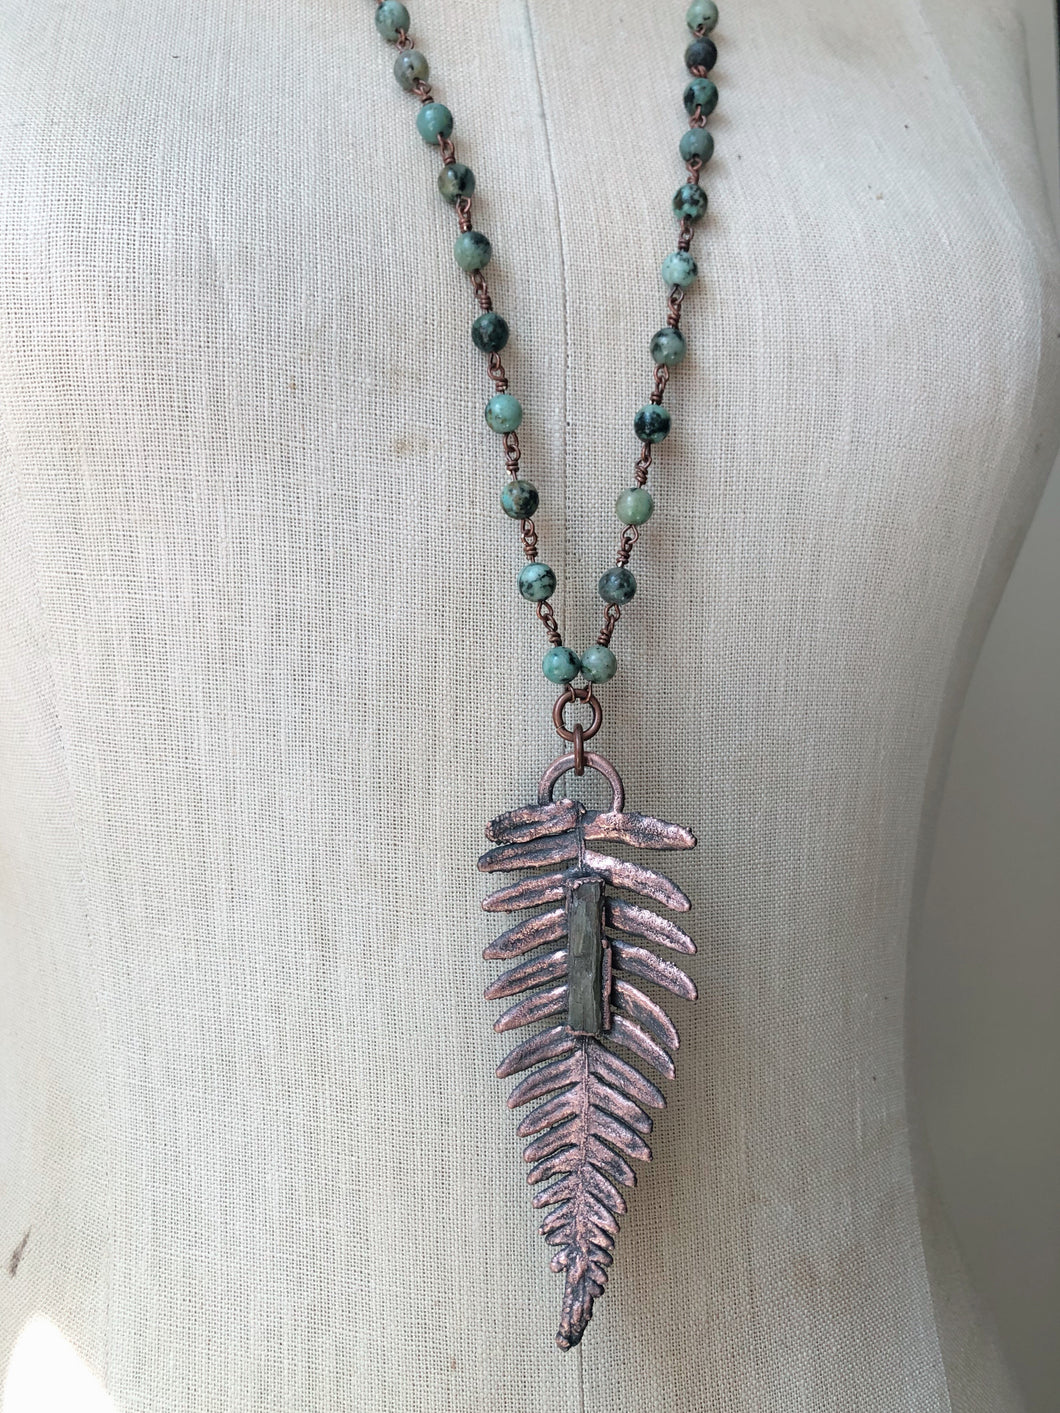 Electroformed Fern with Raw Green Kyanite Necklace #1